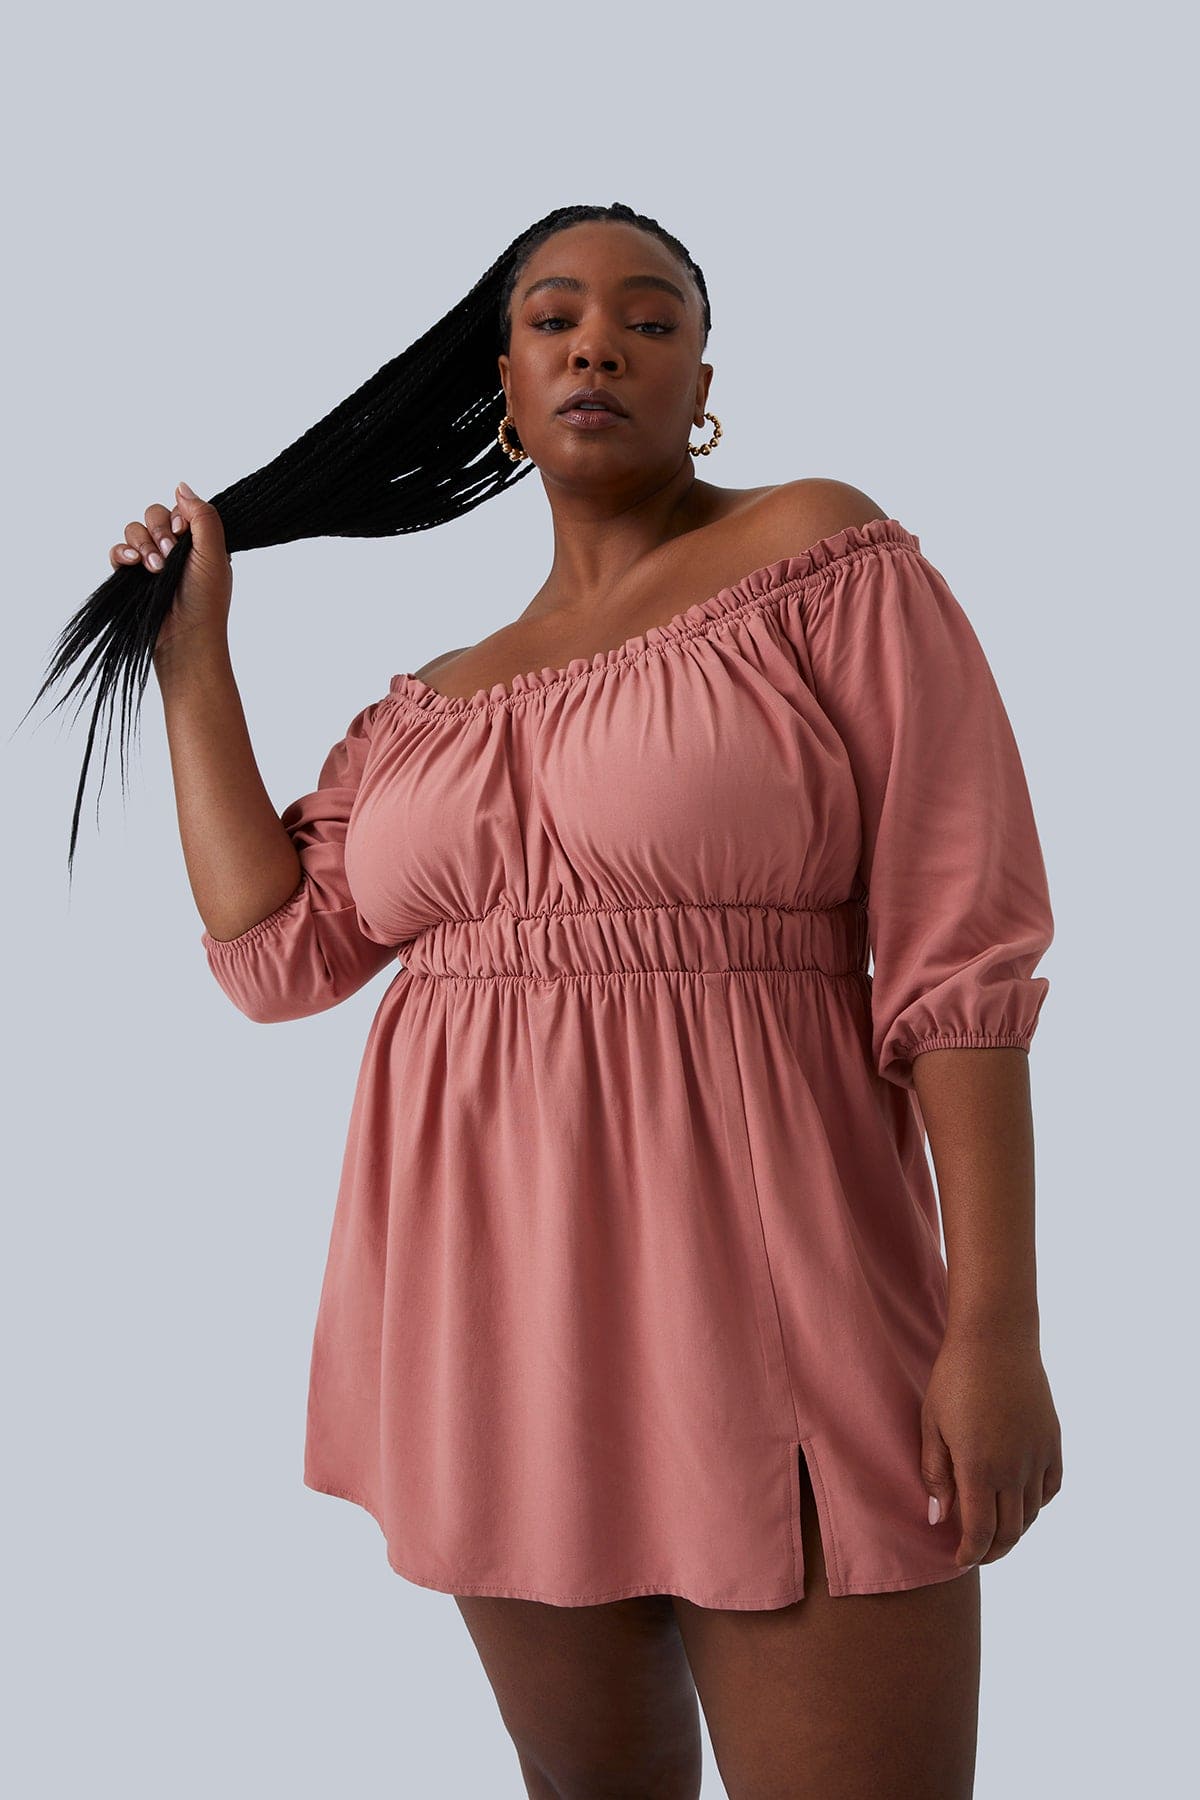 Plus size model wearing Gianna Mini Dress in blush size 1X. She is holding her long, braided pony tail in her hands and leaning back. Little, sexy slit in the front. Shop Gia IRL Plus Size Boutique.